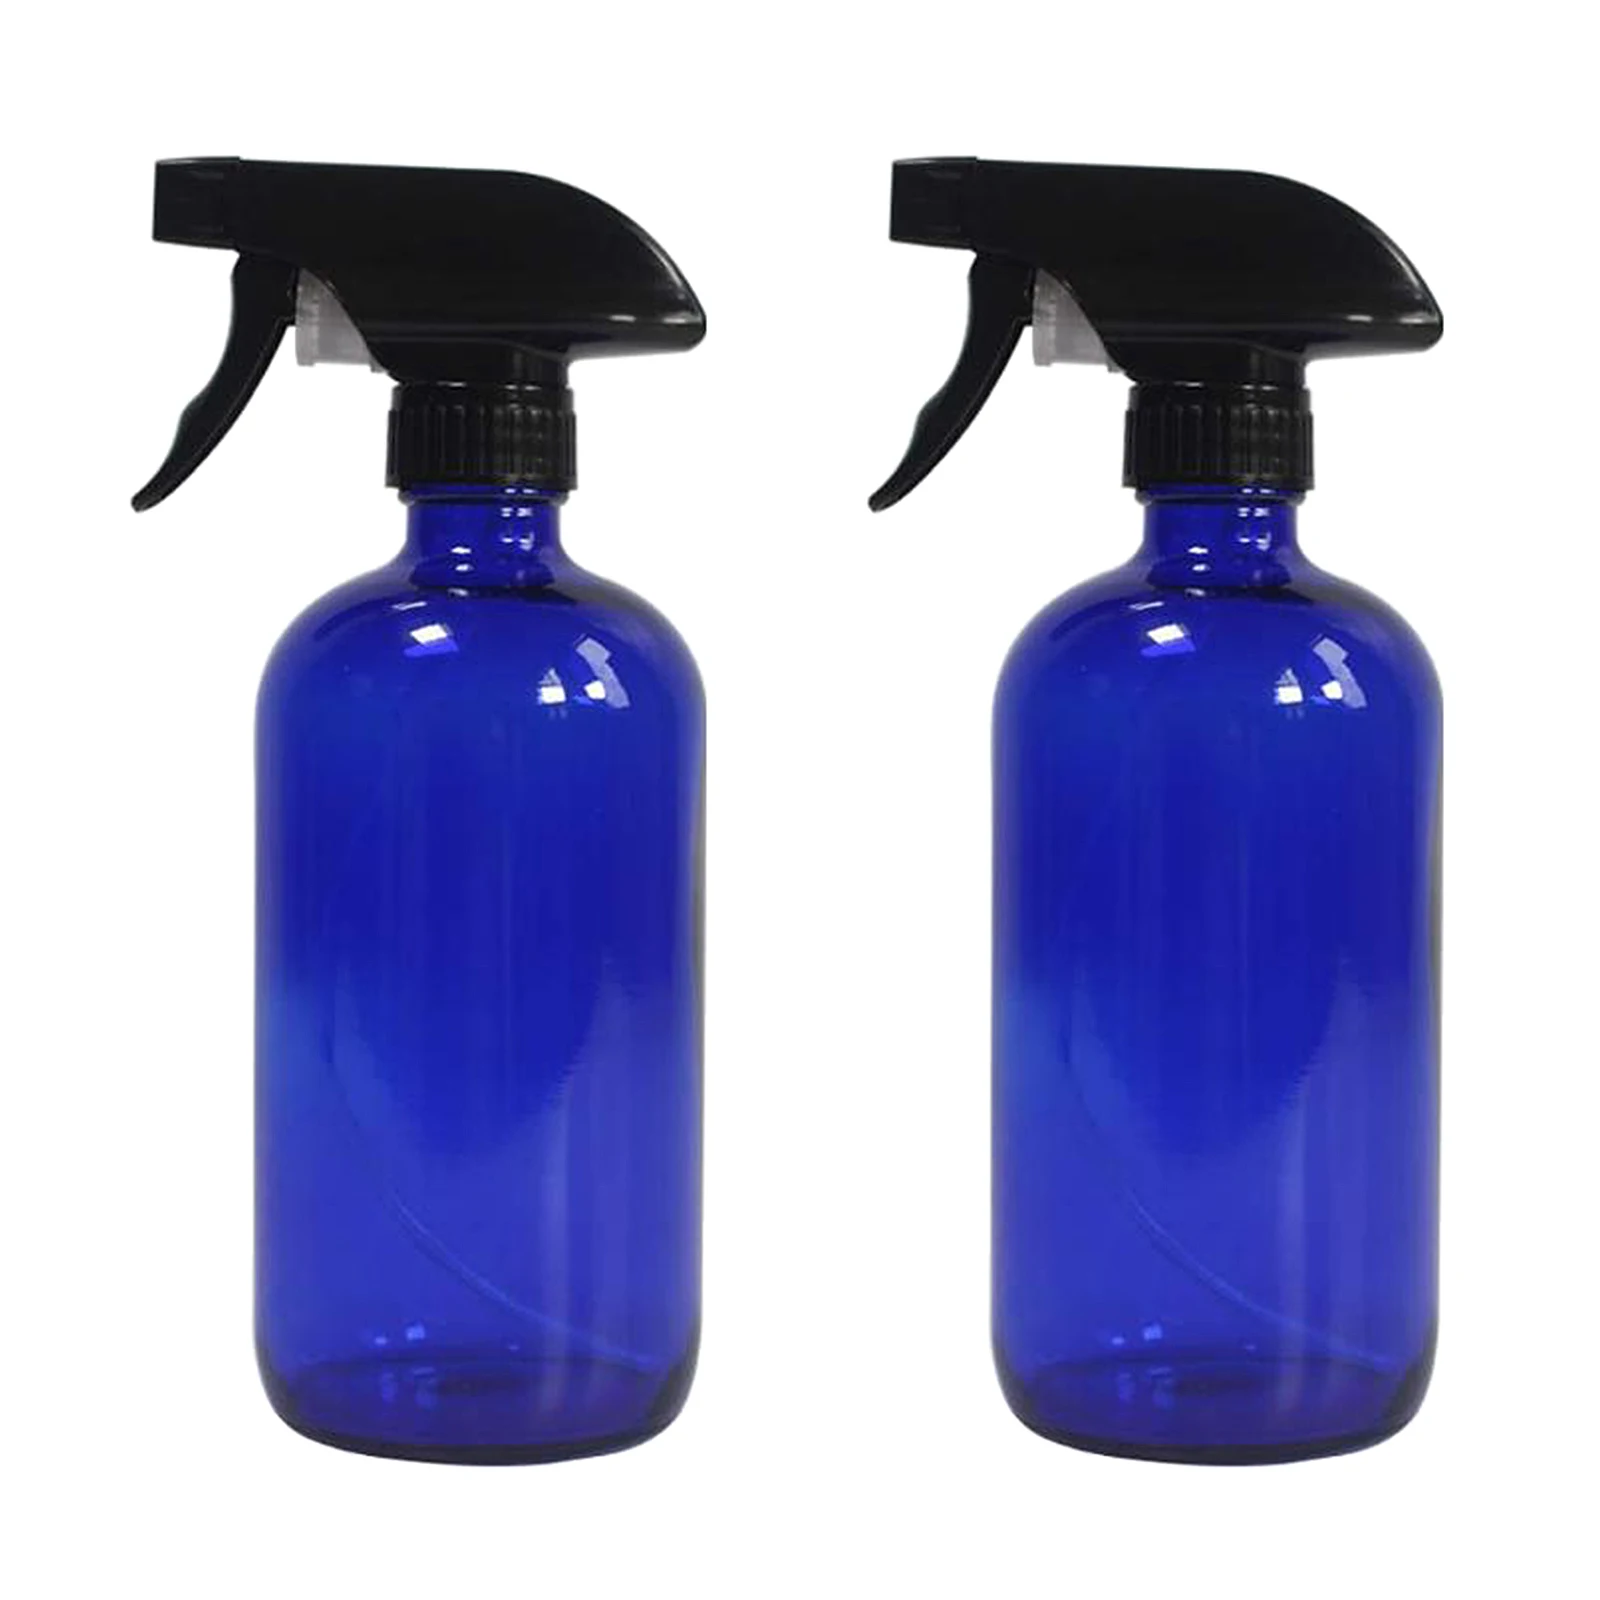 2 Pieces Boston Empty Glass Sprayer Bottles for Oils, Great Never Go Back to Commercial Cleaners